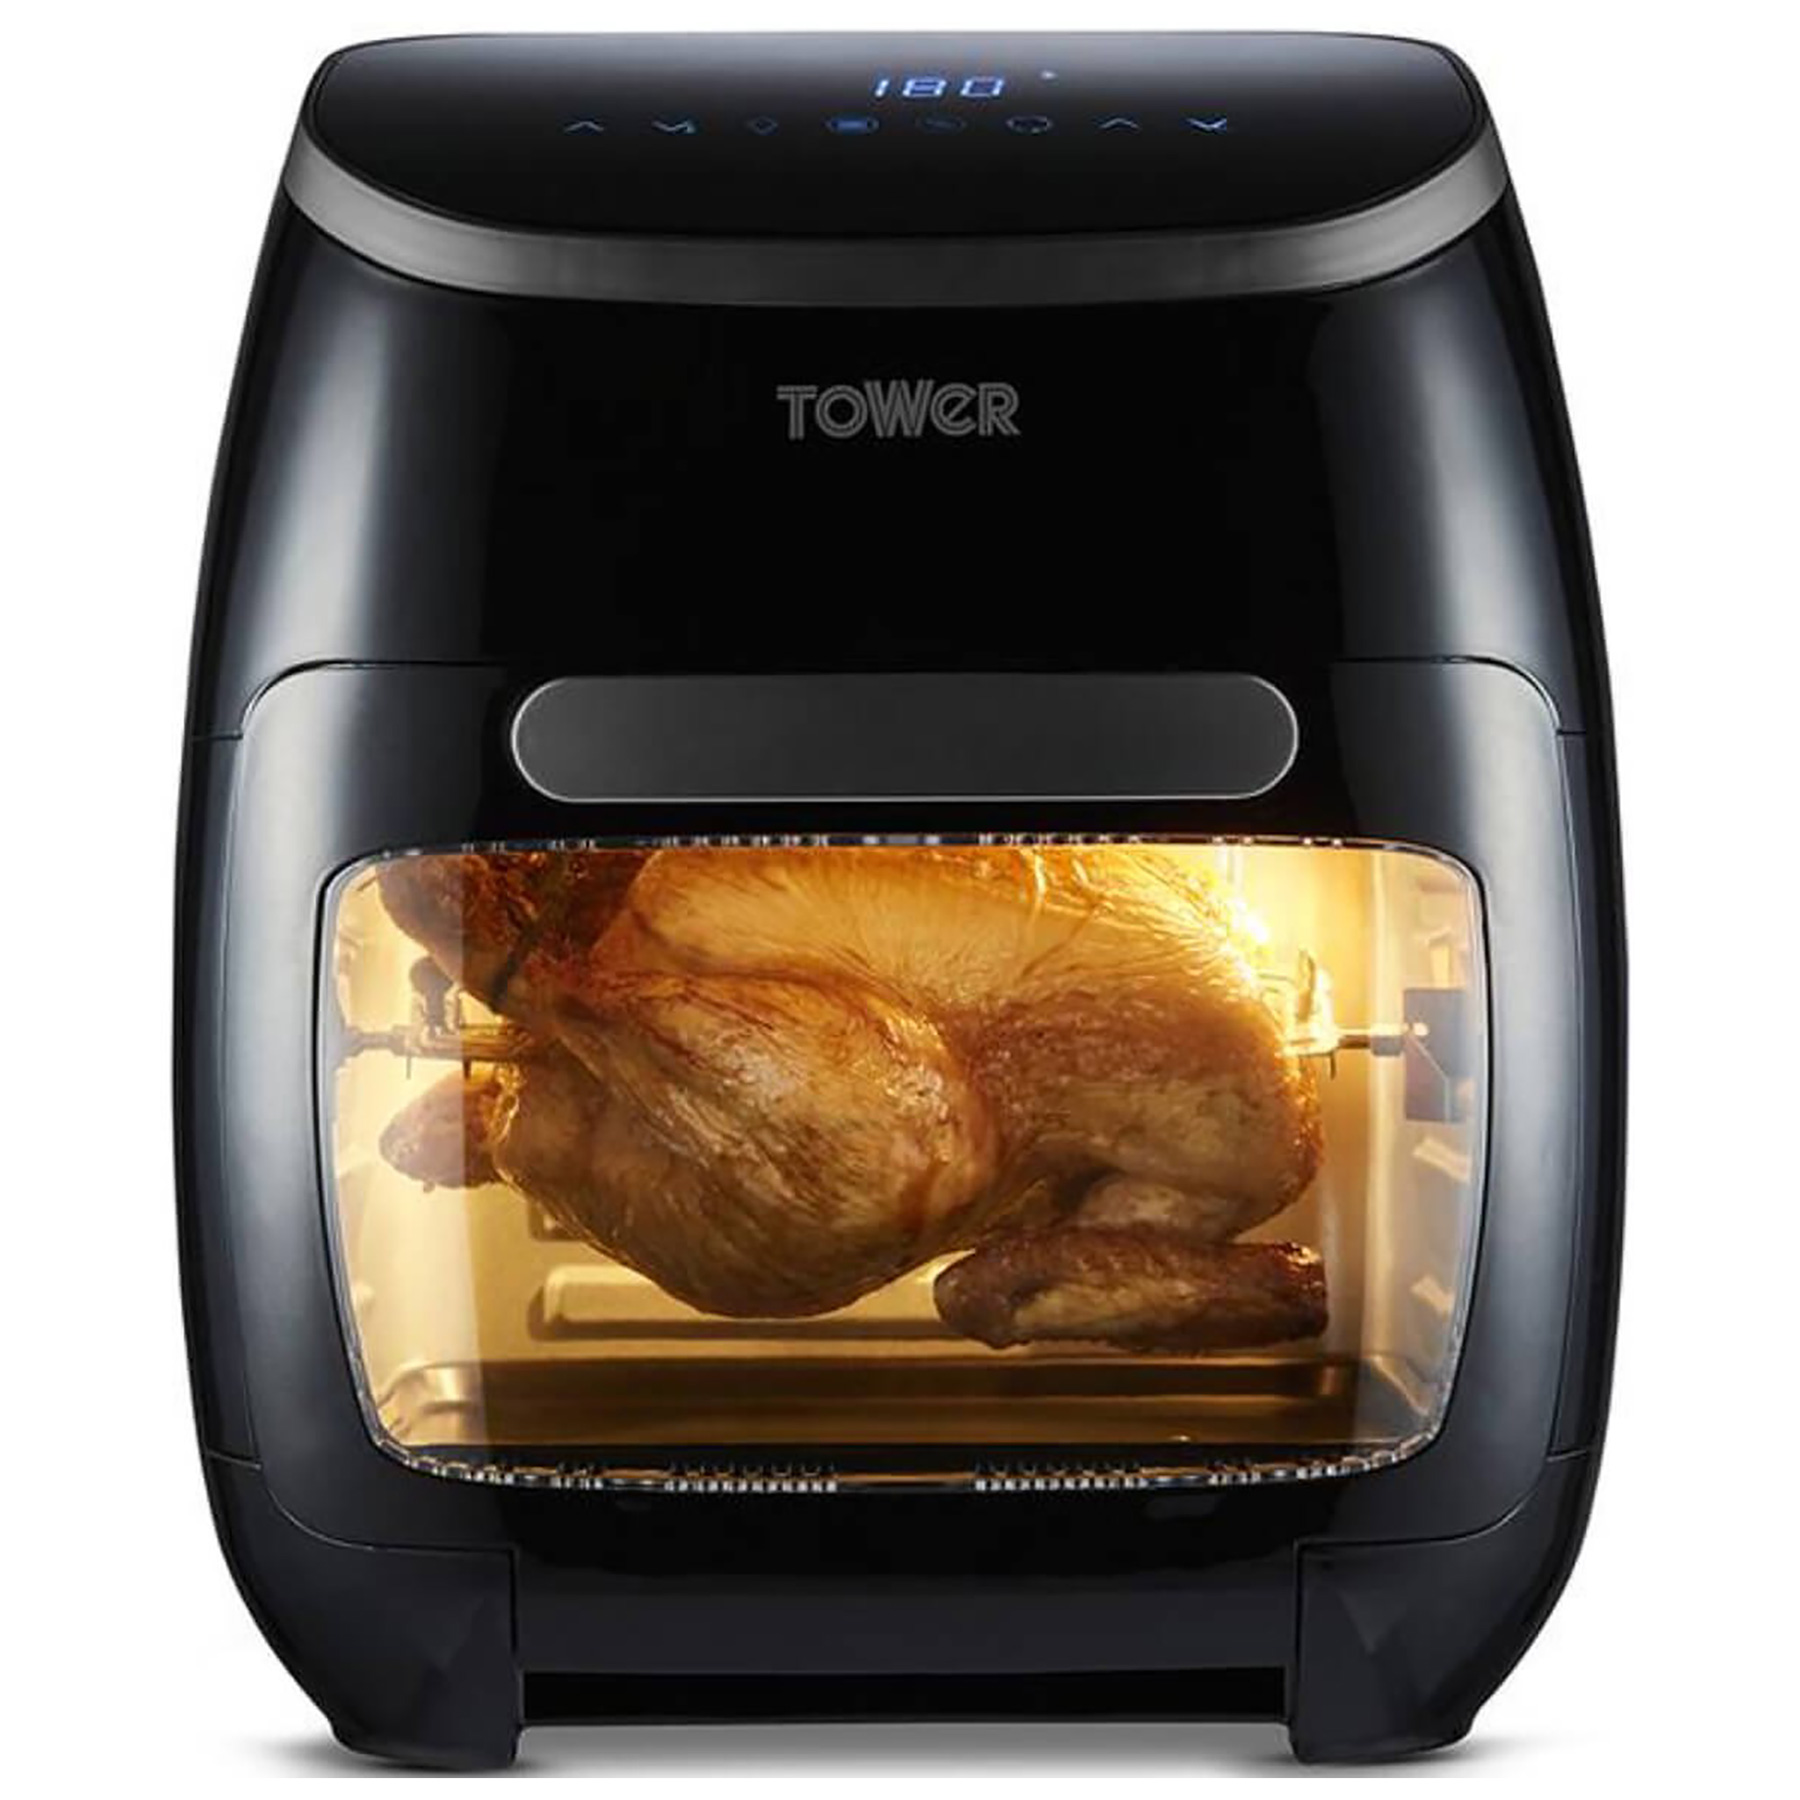 Tower T17076 11L XPRESS PRO 10 in 1 Digital Air Fryer Oven in Black